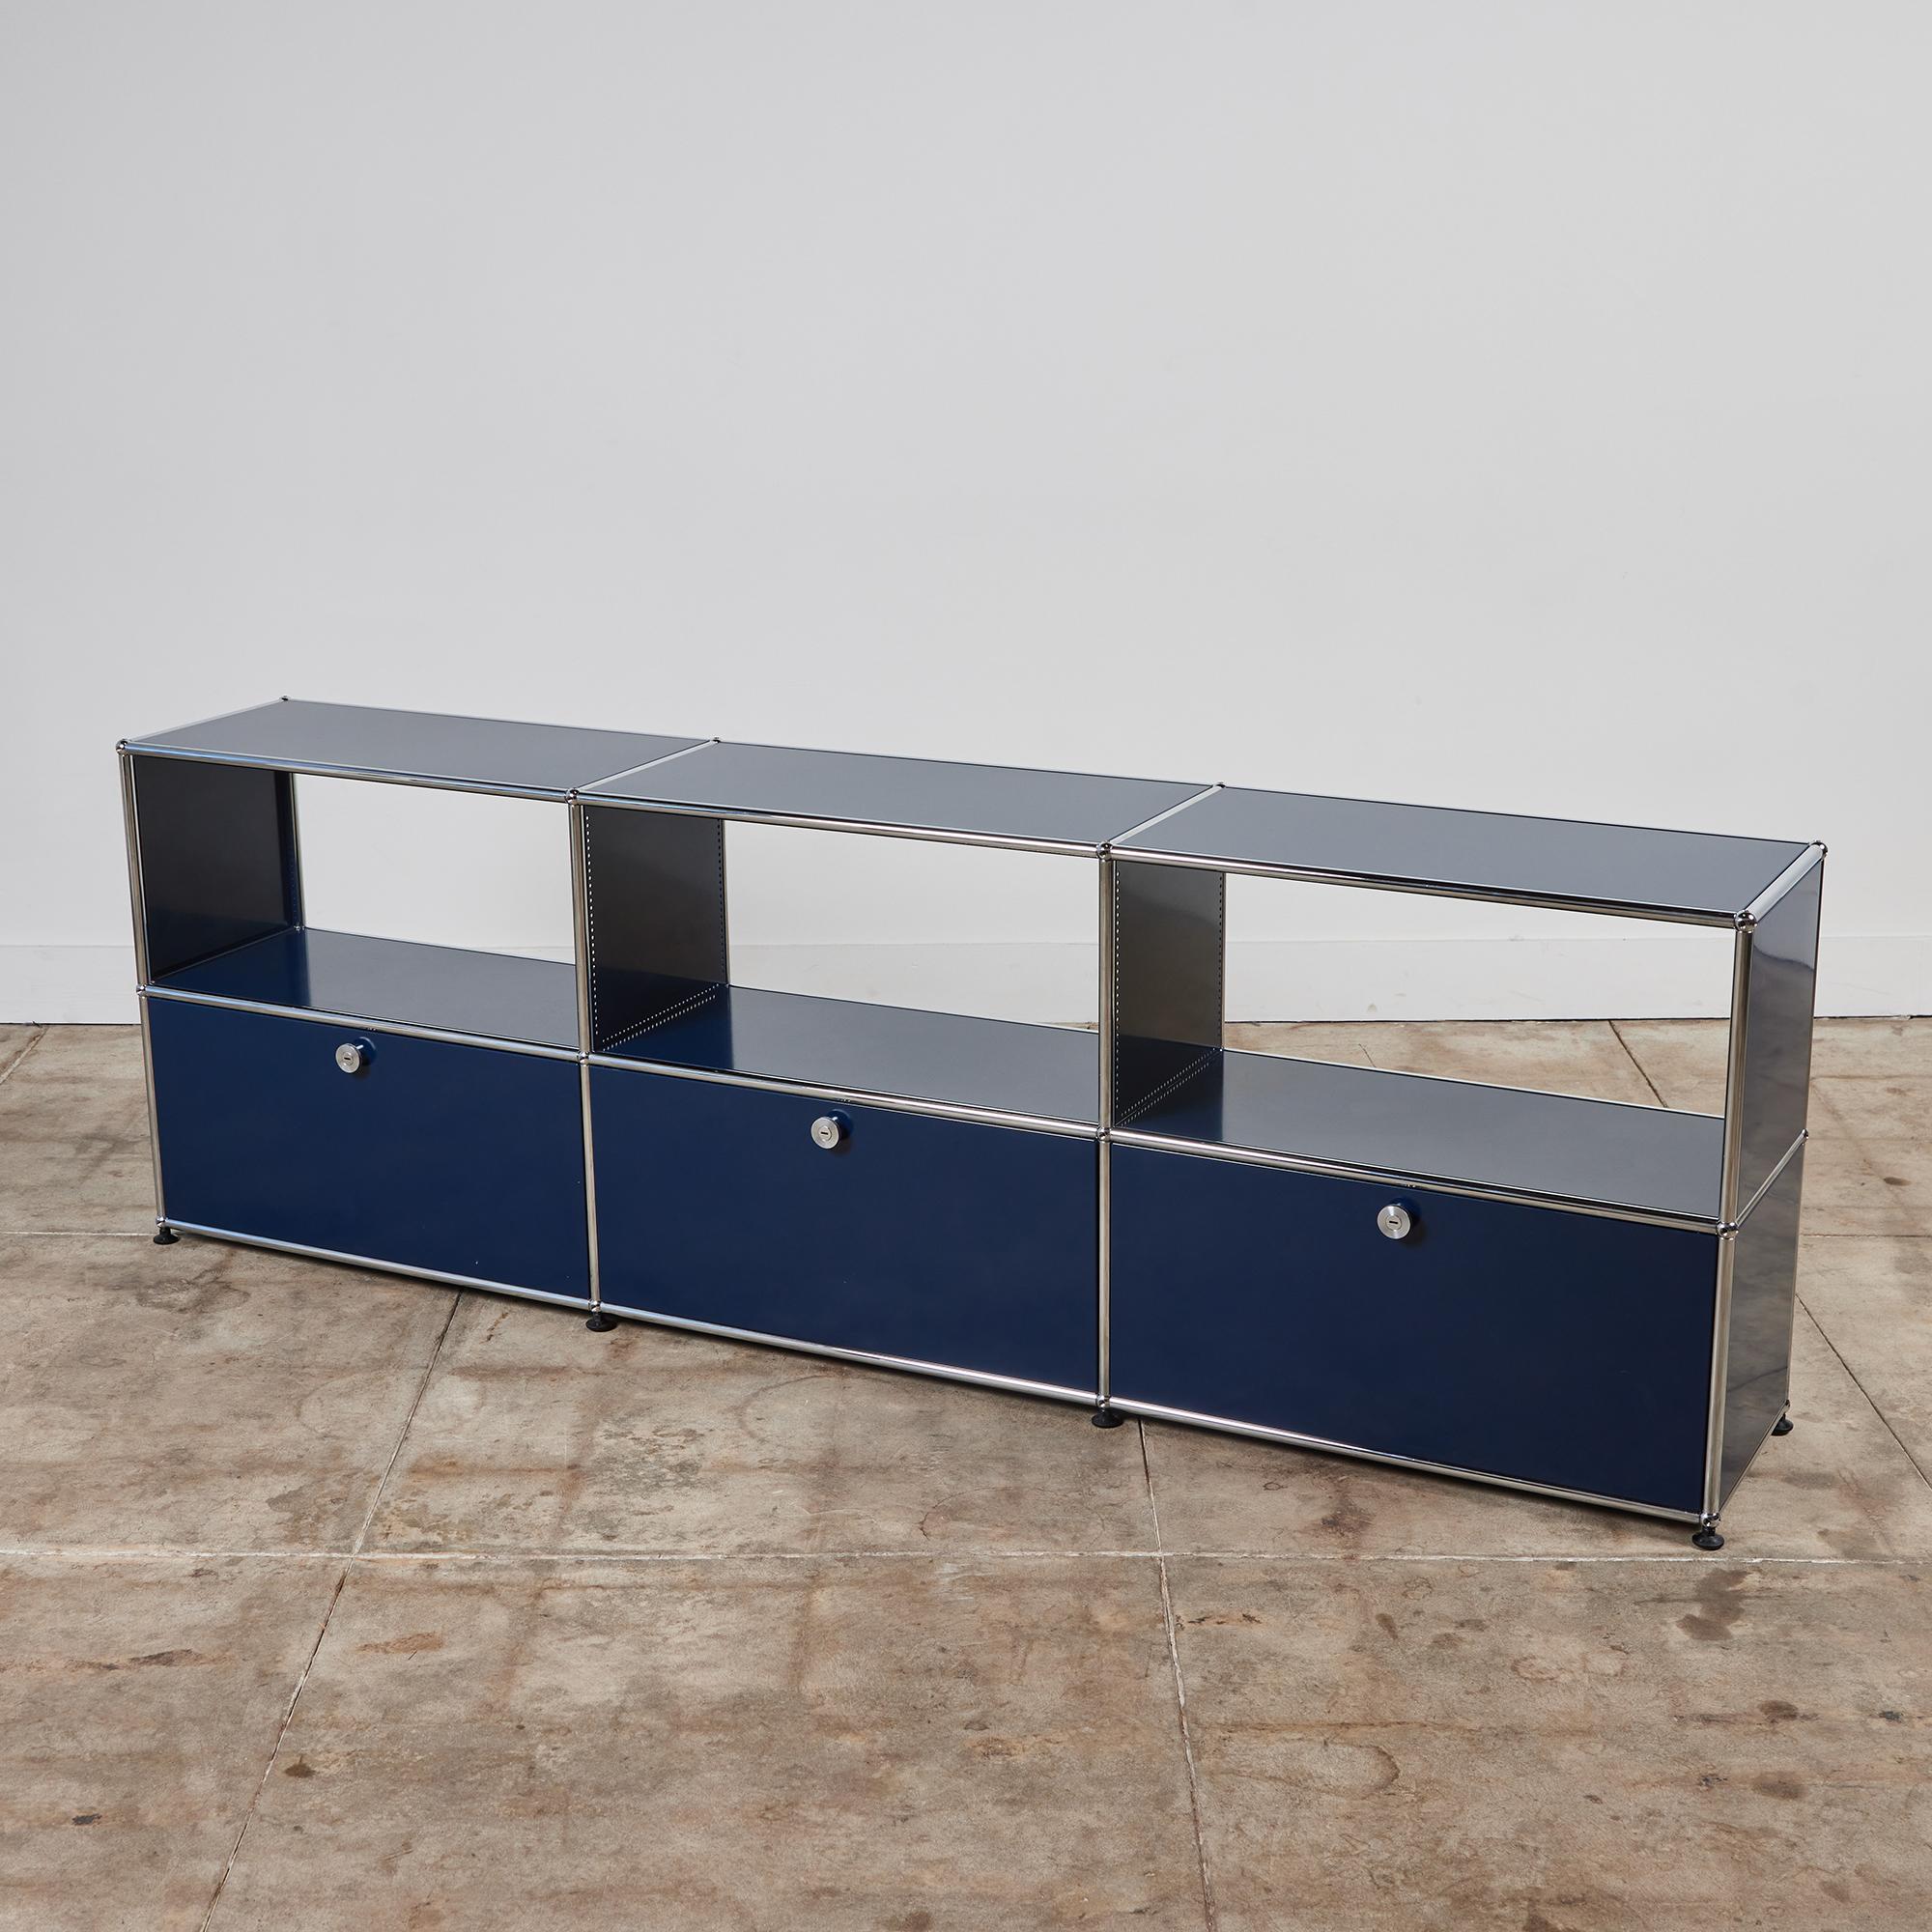 Architect Fritz Haller was commissioned by USM Modular Furniture in the 1960s to create a USM Haller shelving unit. This storage system, made in Switzerland, was created based on three basic construction elements; a ball, screw in connecting tubes